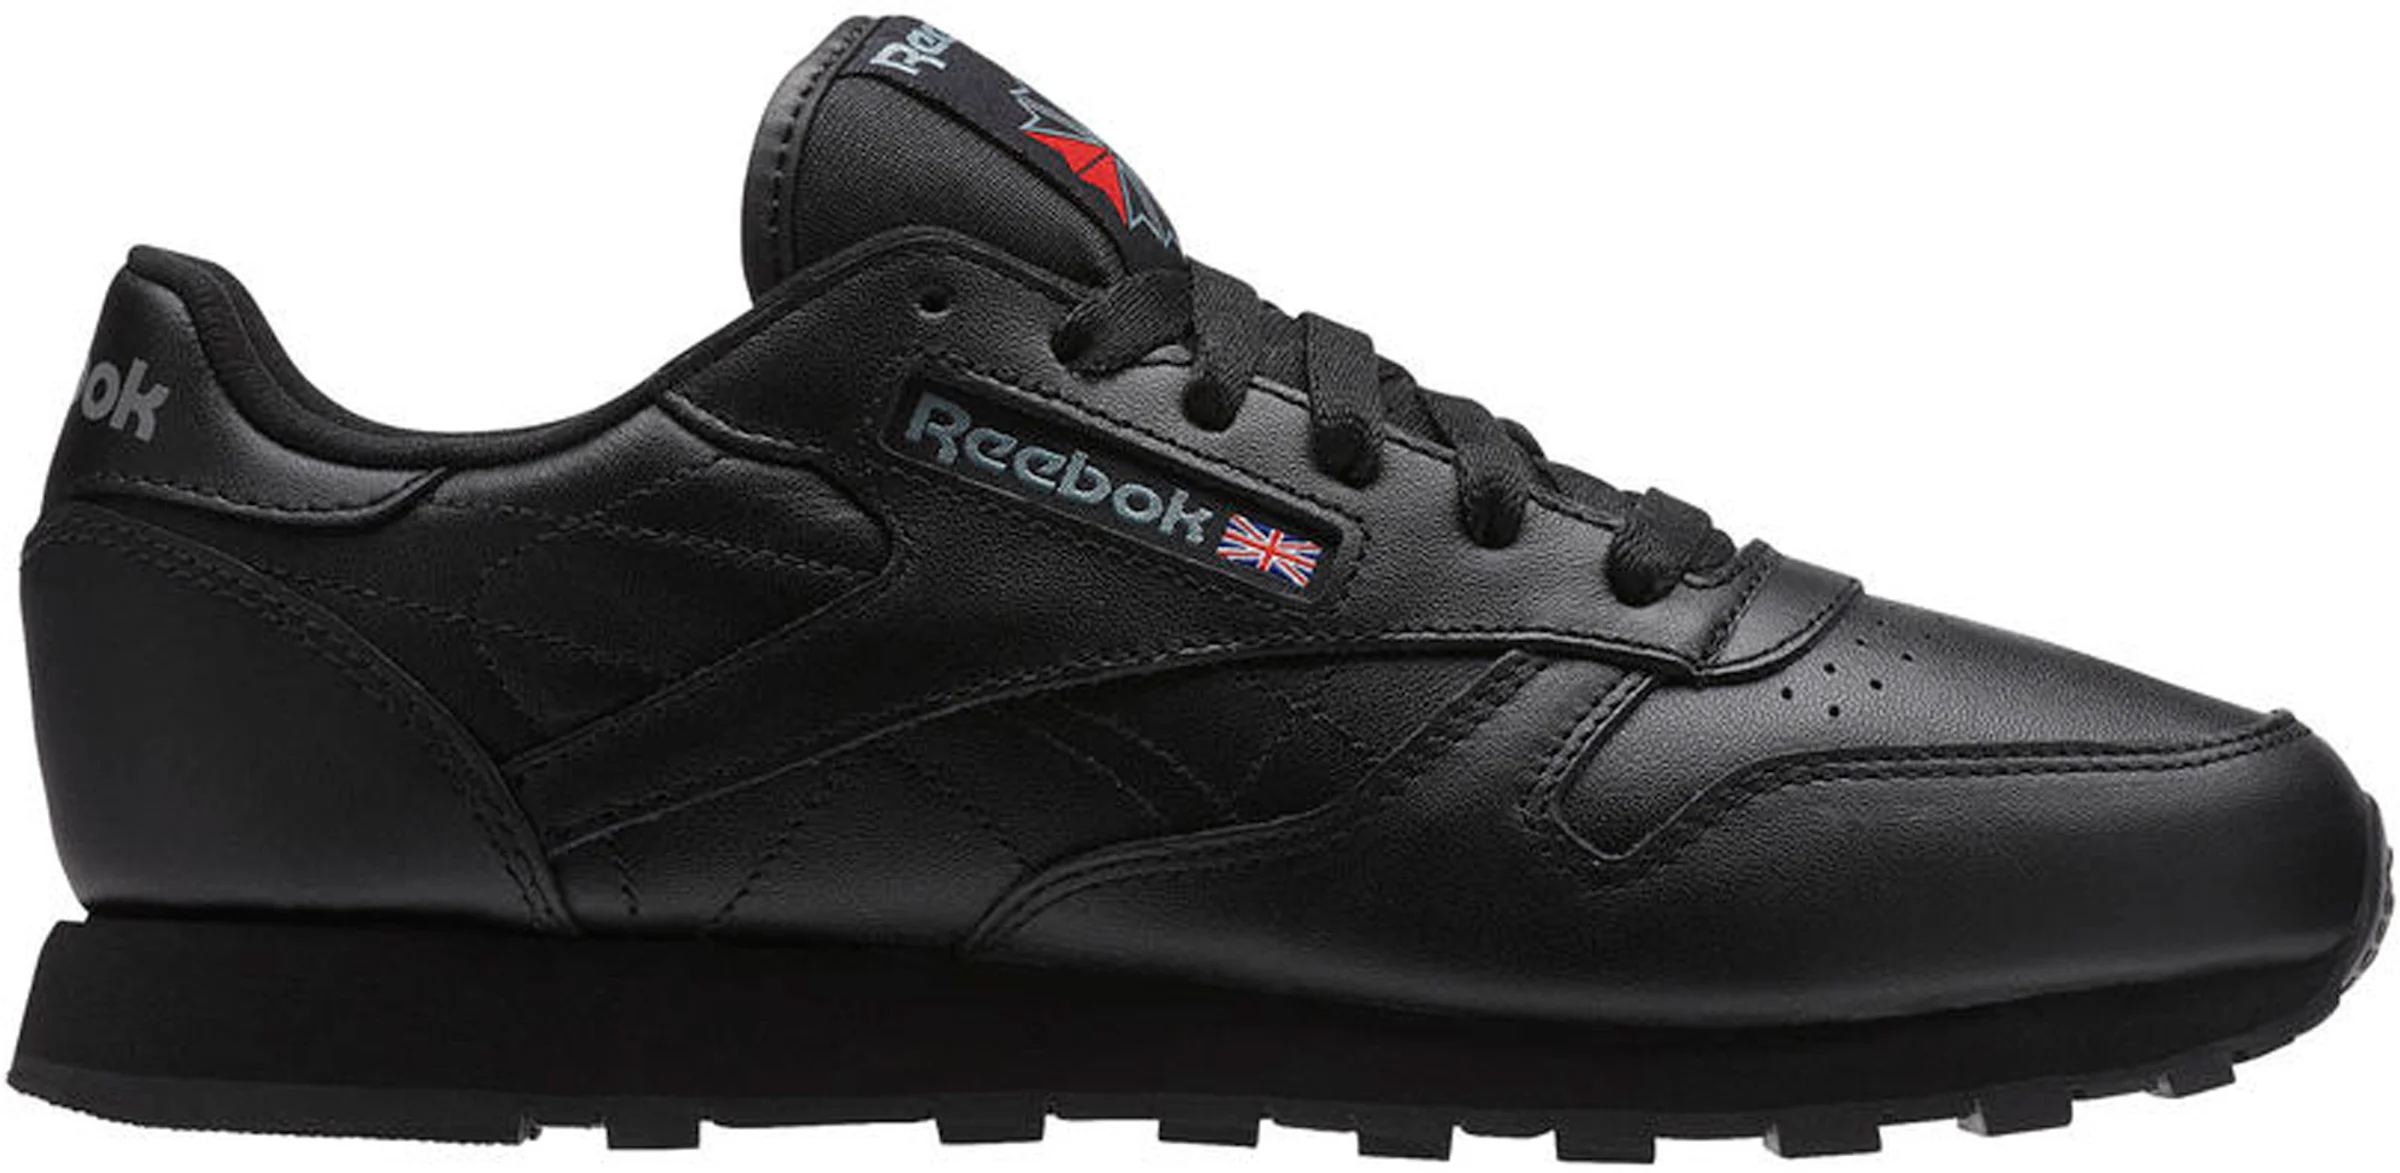 Reebok Classic leather sneakers black color